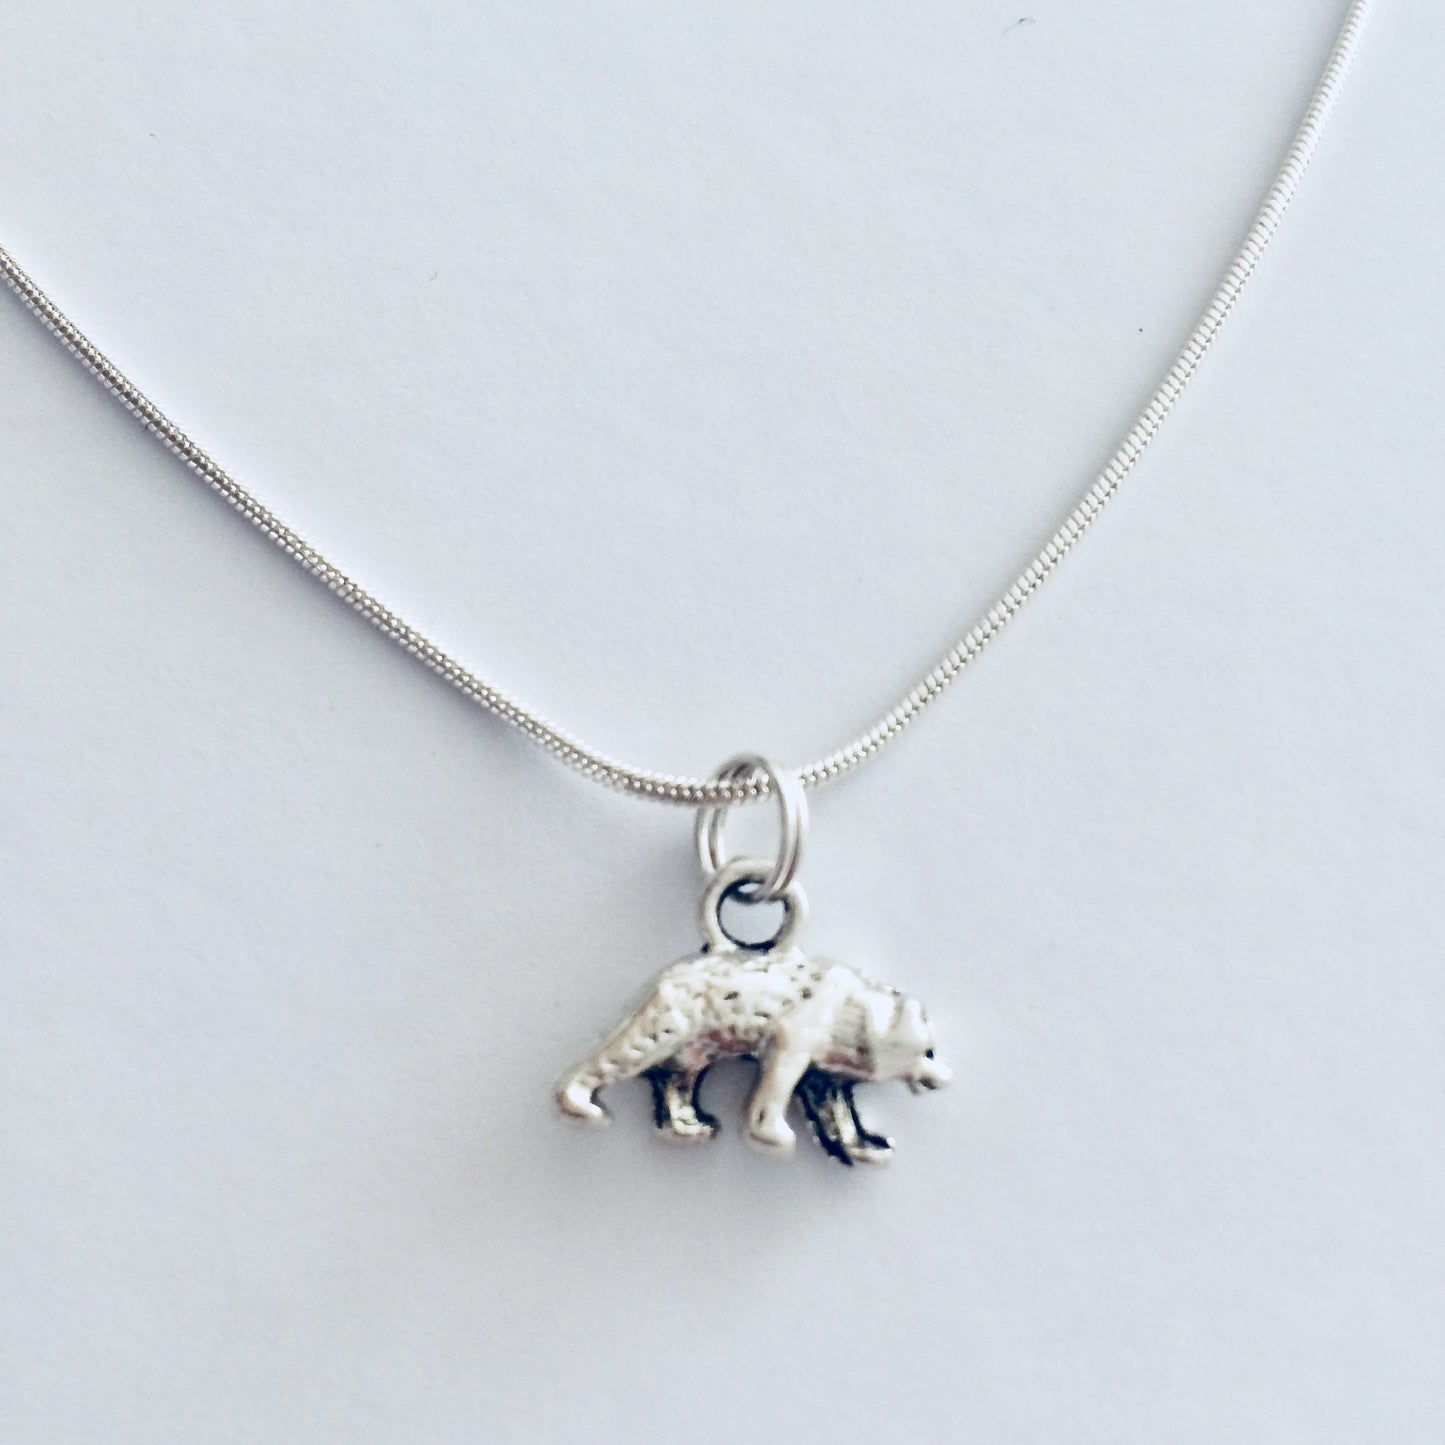 Bear Necklace, Bear Jewelry, Animal Related Gifts, Bear Lover Jewelry, Wild Animal Necklace, Animal Gifts, Bear Jewelry, Bear Pendants.